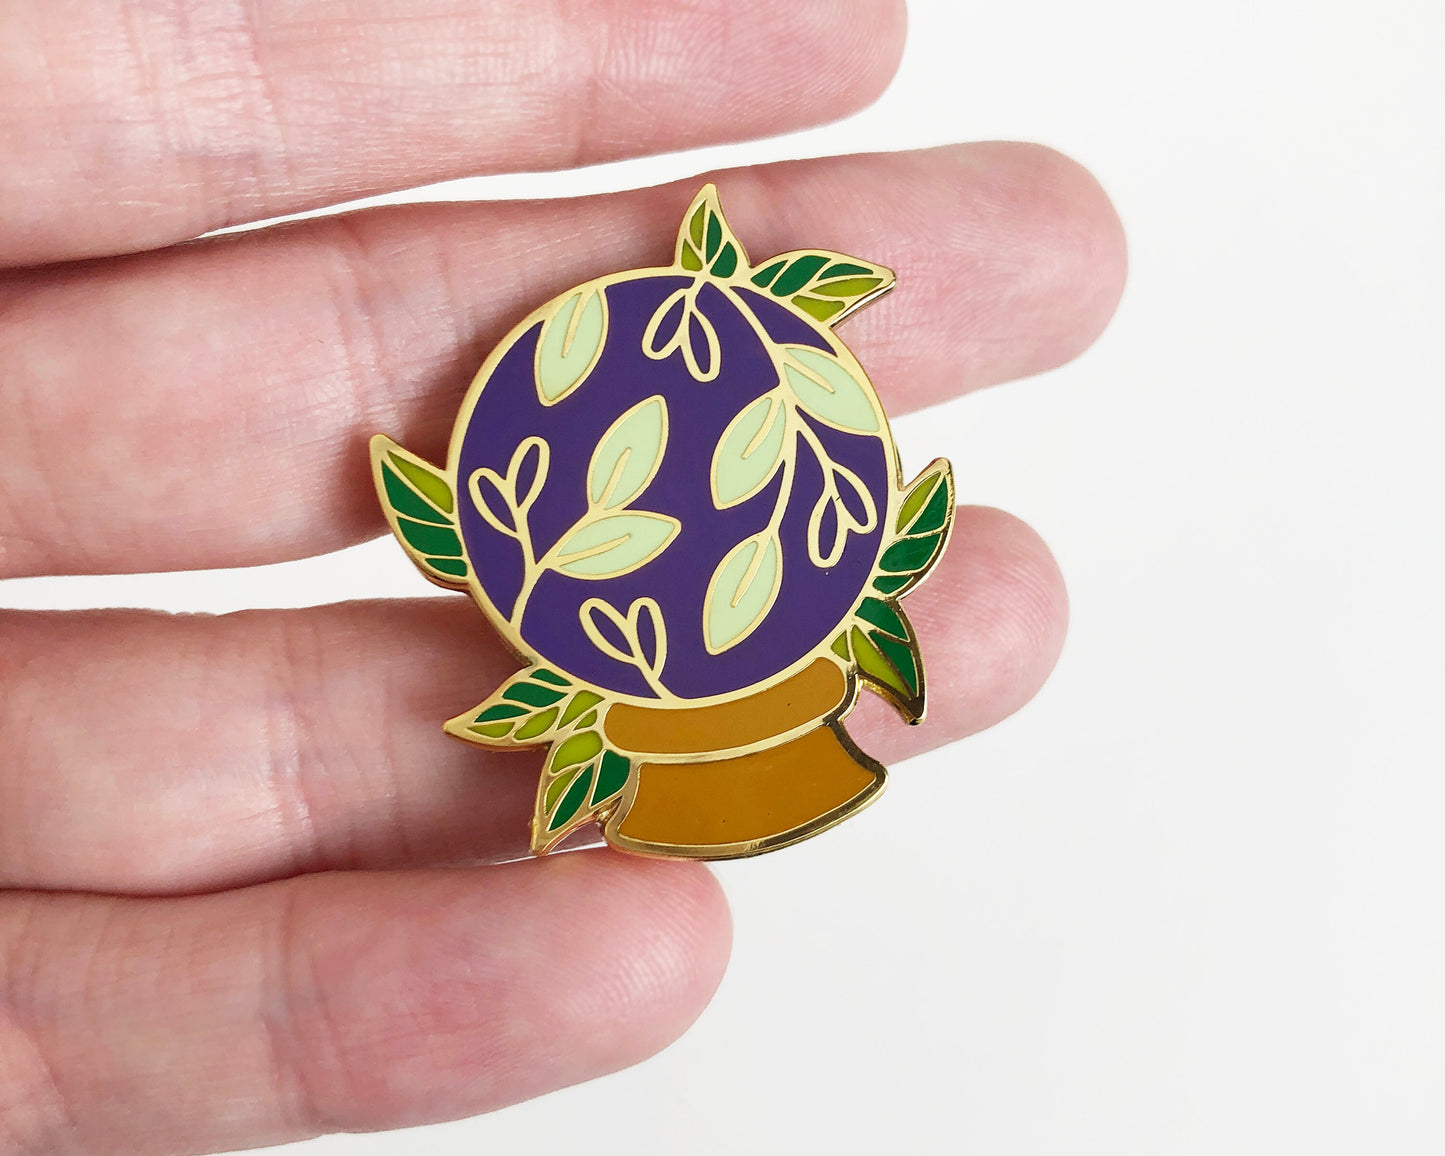 Crystal Ball enamel pin, Enamel pin, lapel pin, witchy pin, plant clothing accessory, spooky pin, witchcraft pin, green witch